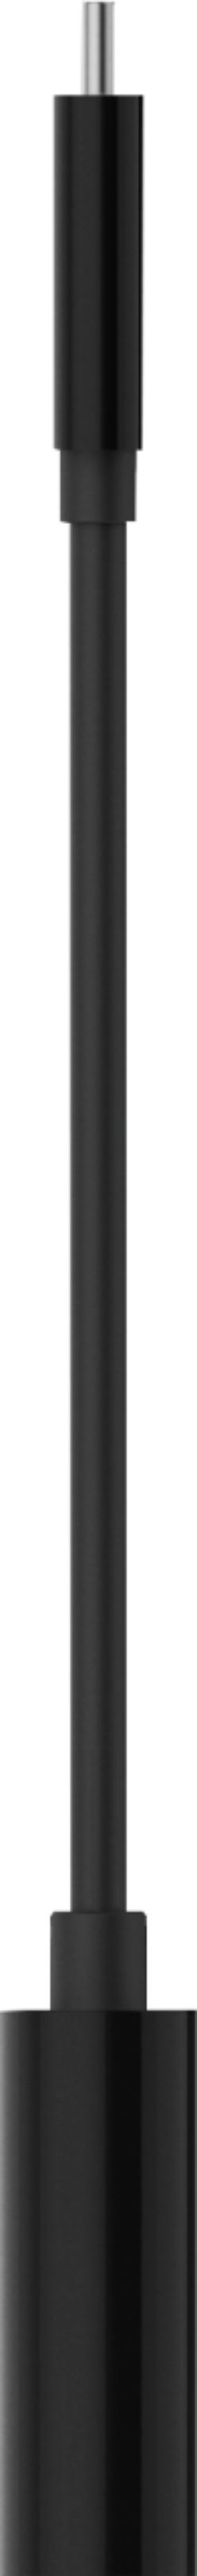 Left View: Axis - 6' USB Type A-to-USB Type B Cable - Black